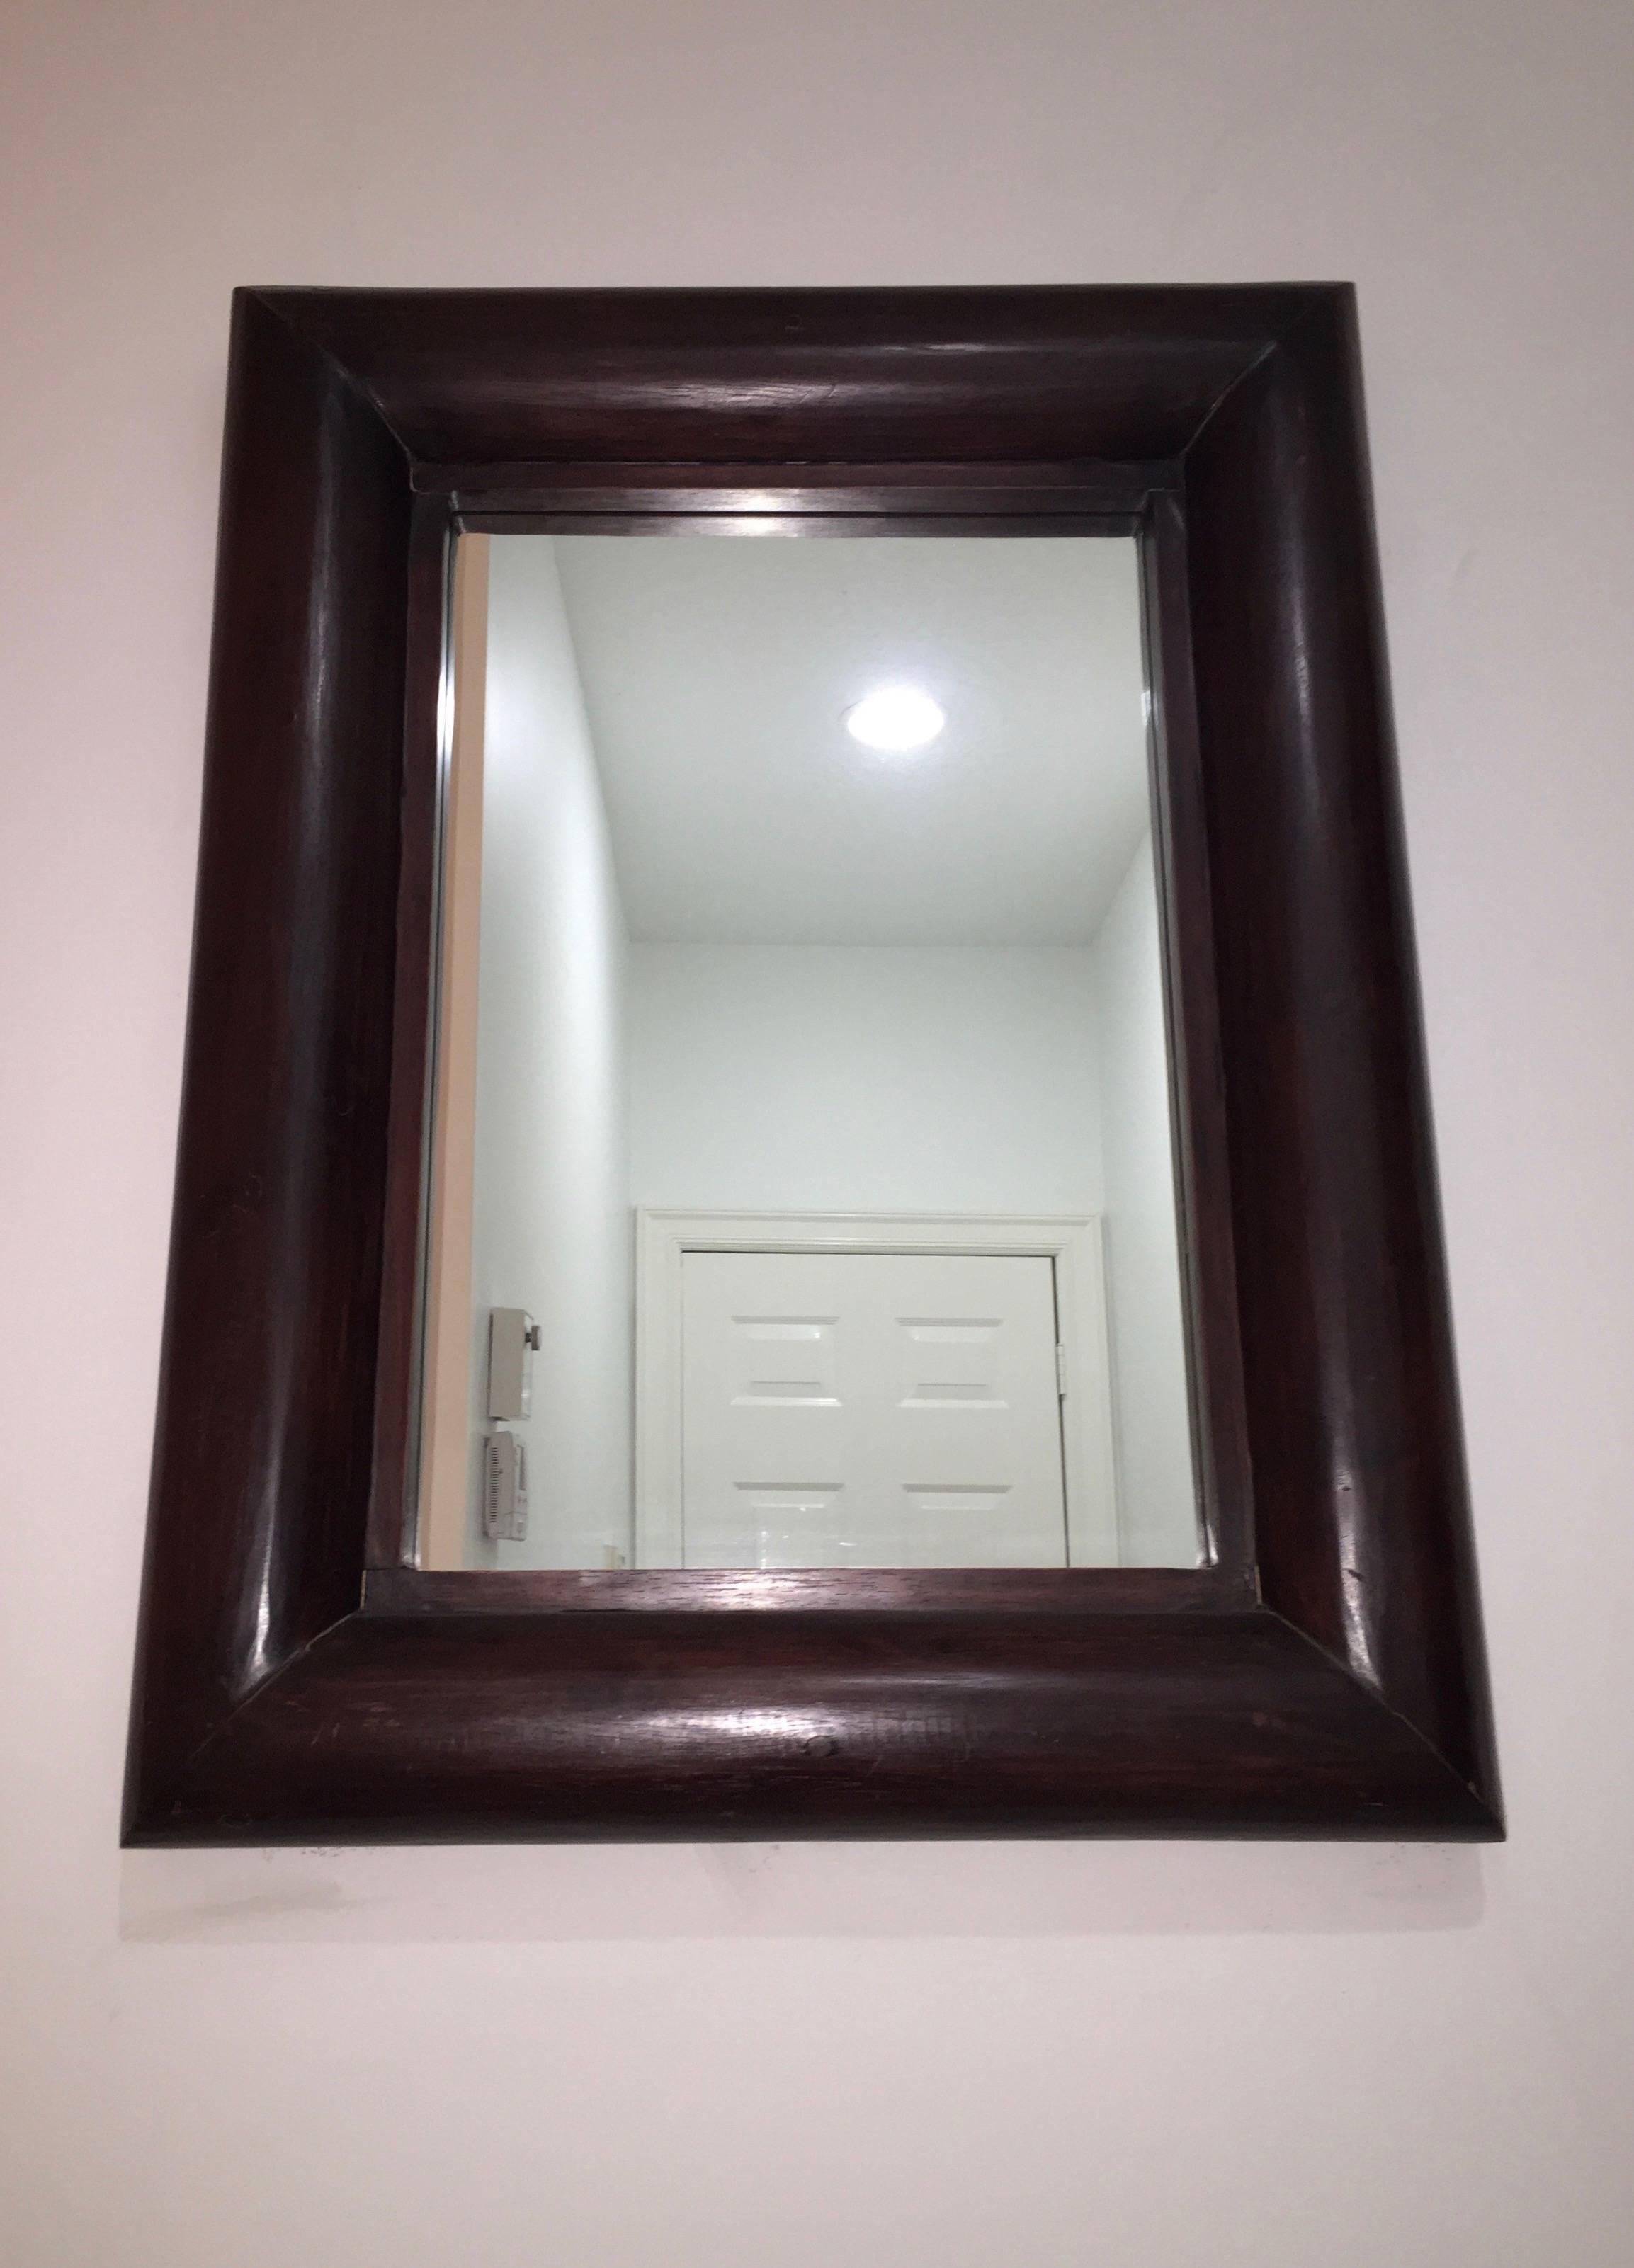 Pair of rounded edge, solid wood rectangular mirrors with an inside trim of the same wood framing the center mirrored glass.